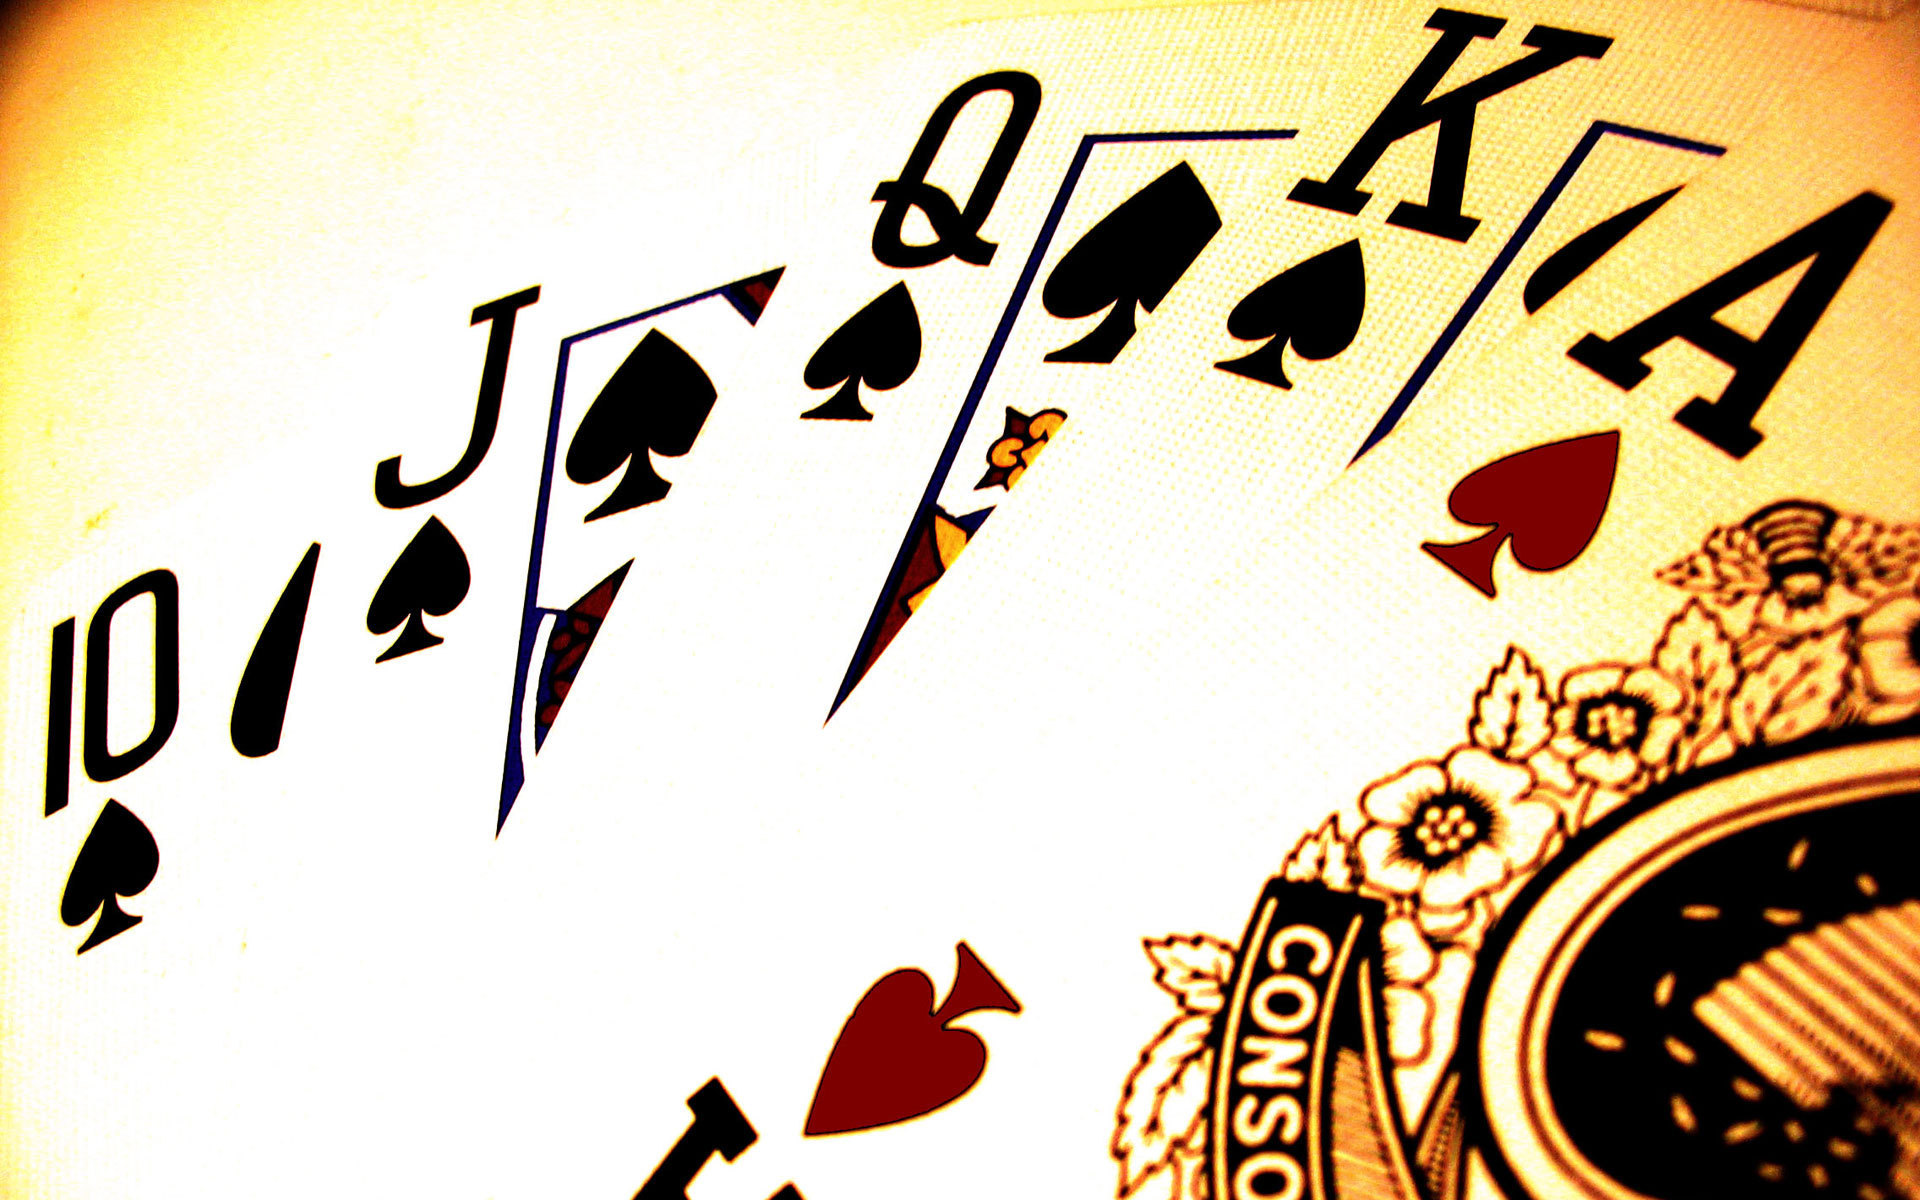 High Resolution Poker Cards Wallpaper HD 15 Game Full Size ...